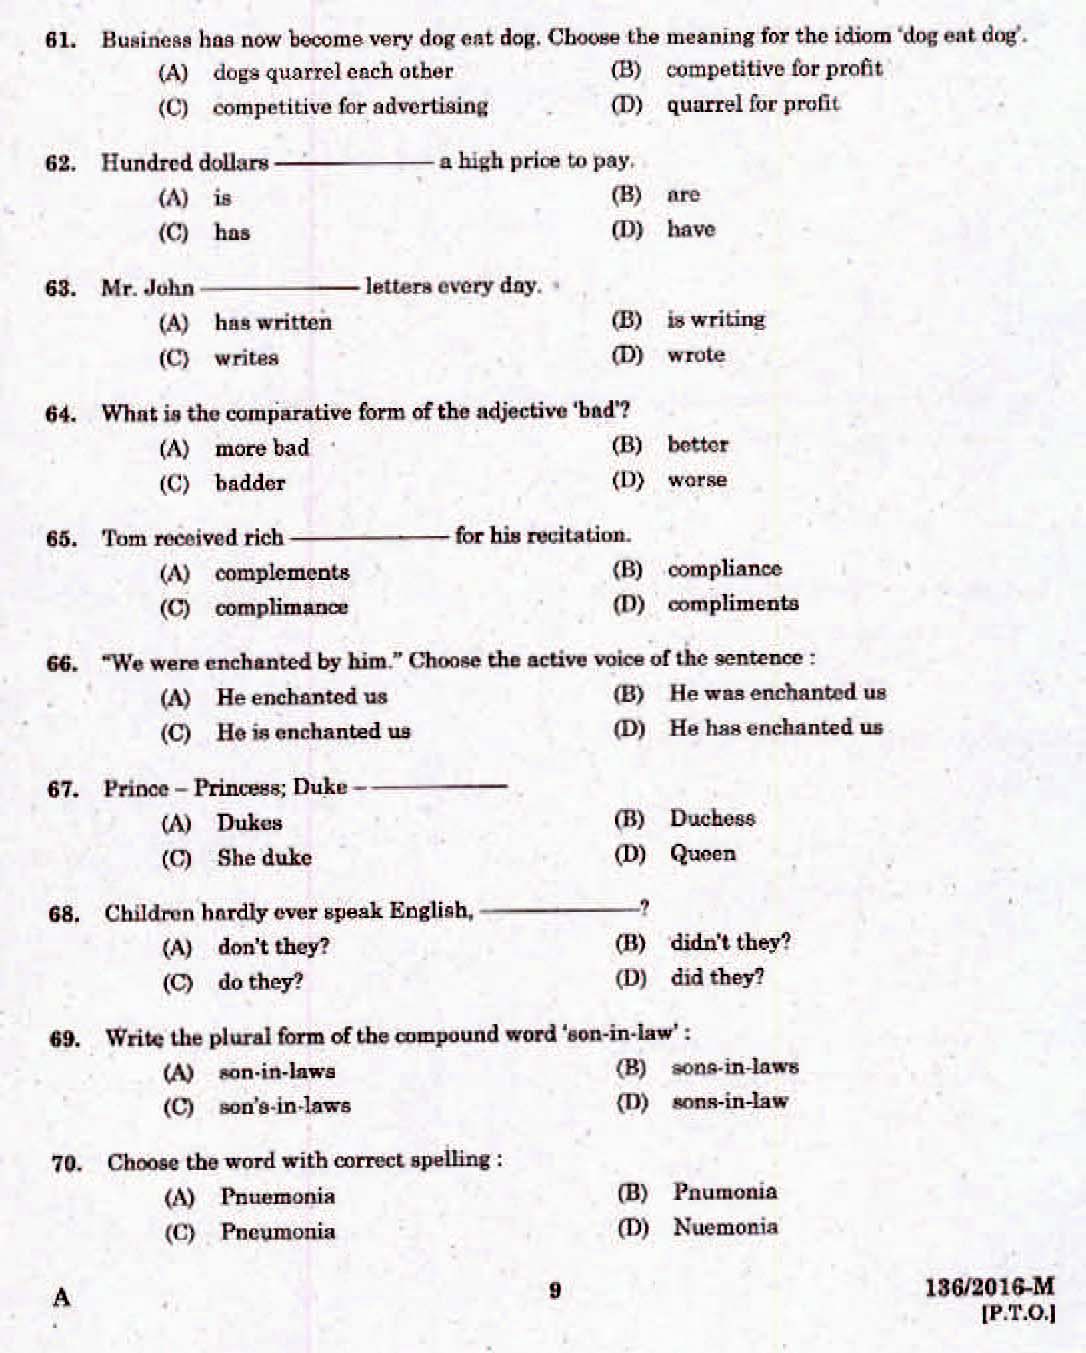 LD Clerk Question Paper Malayalam 2016 Paper Code 1362016 M 7